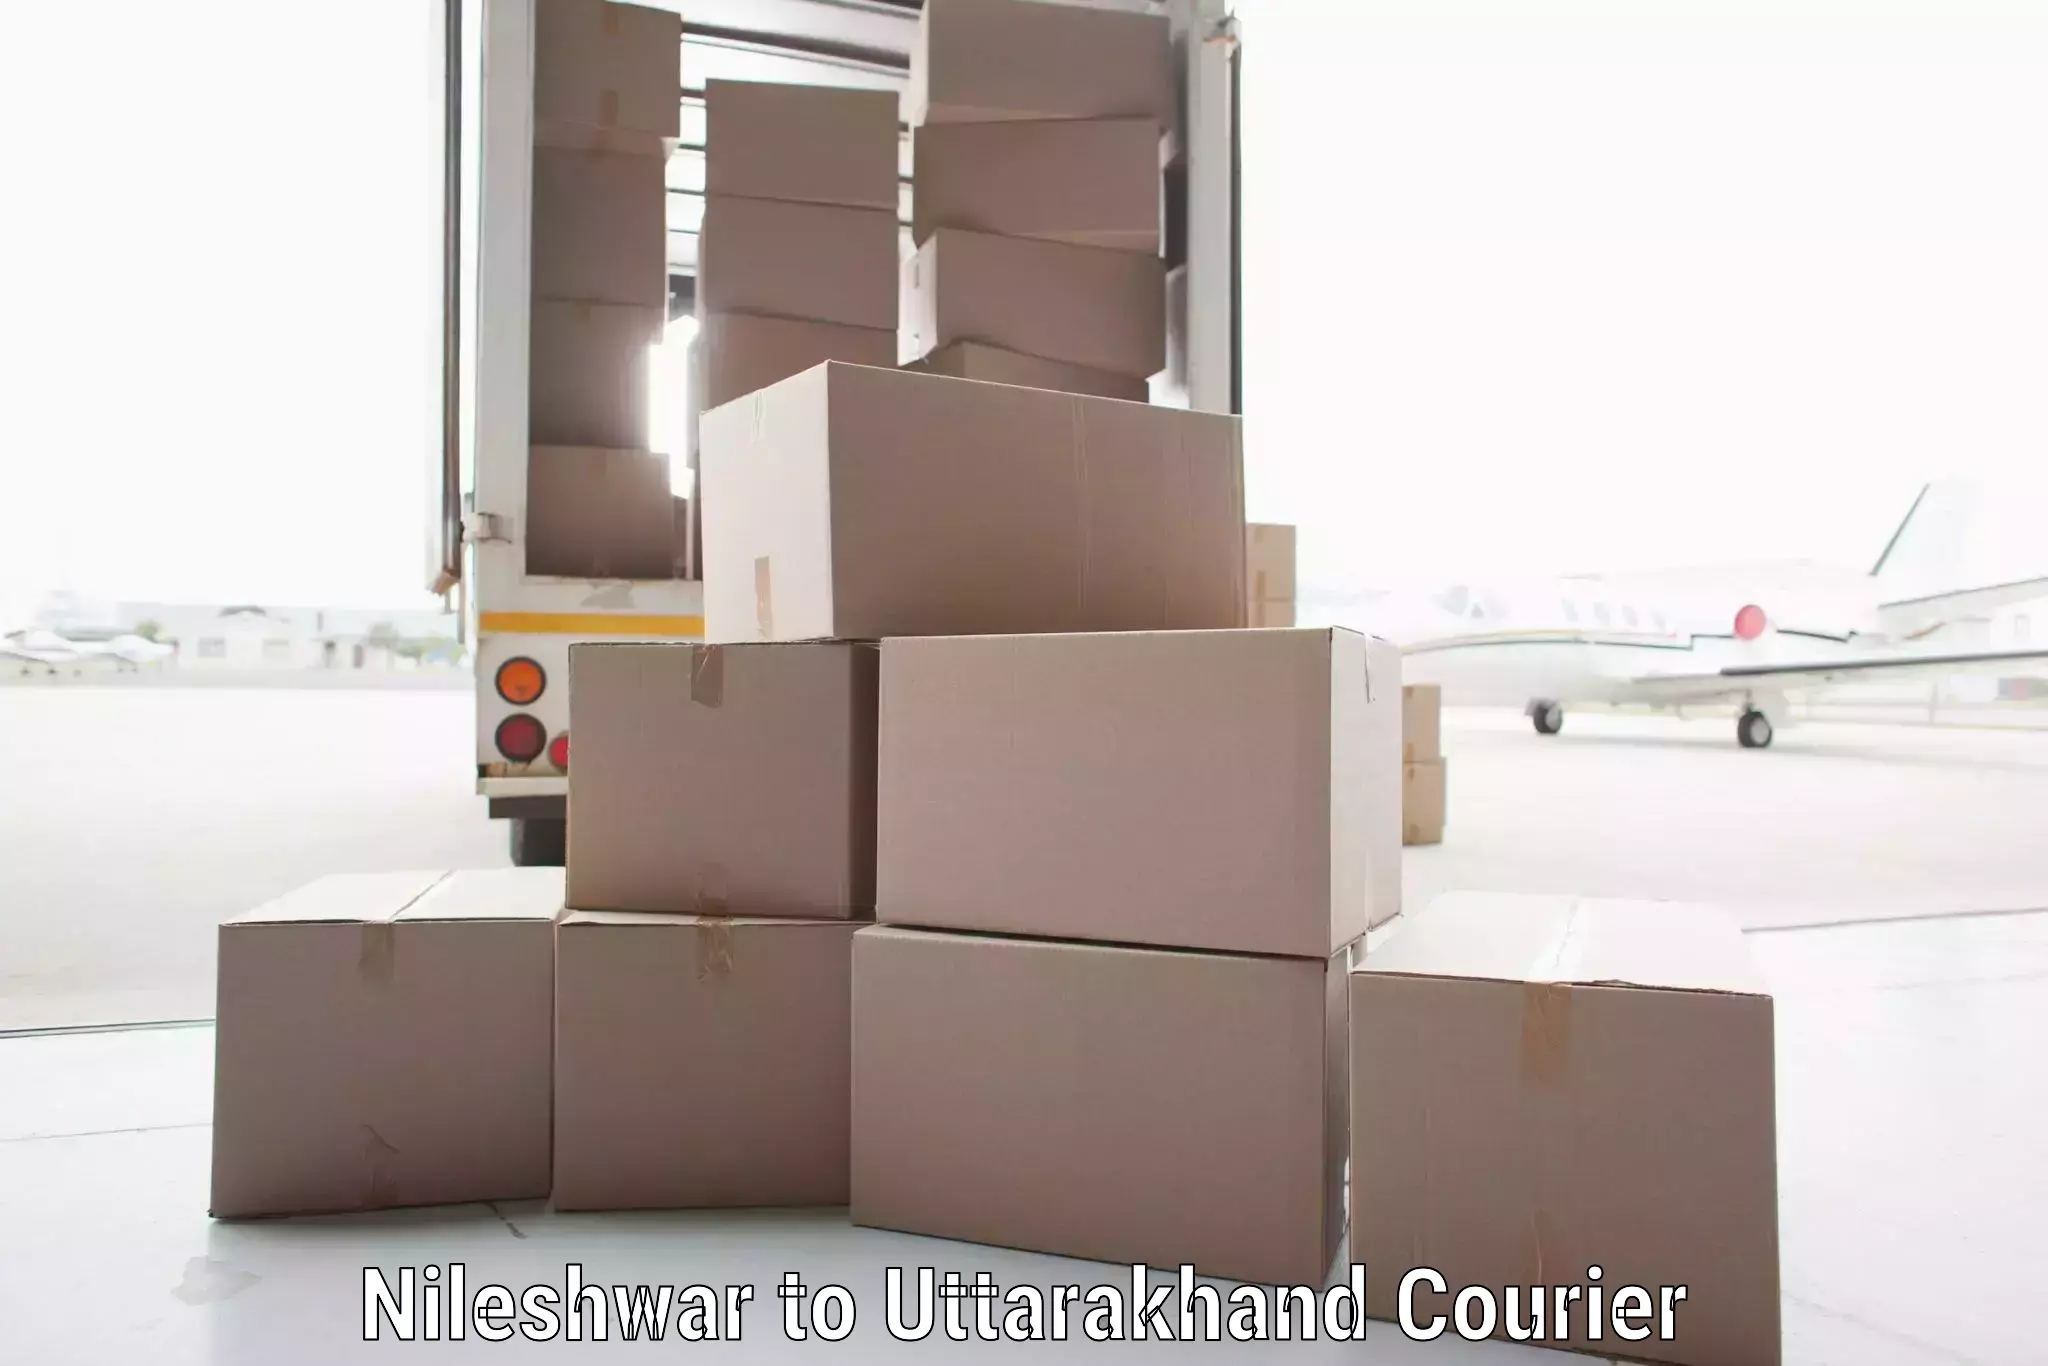 Reliable shipping partners Nileshwar to Rudrapur